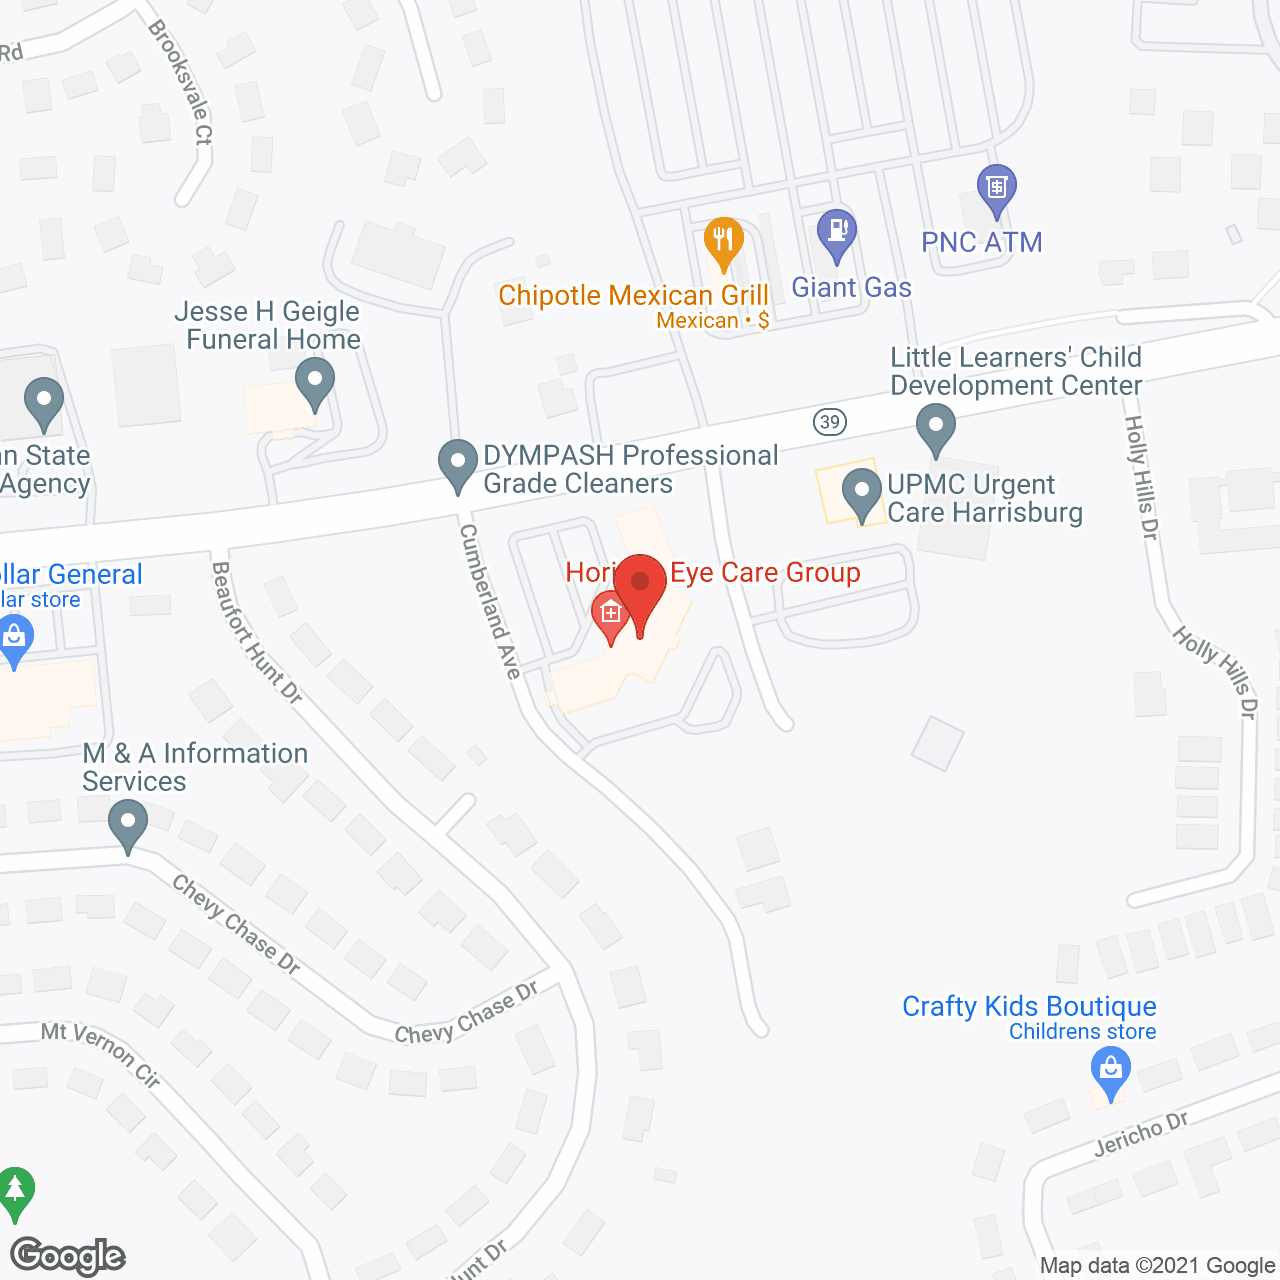 Global Healthcare Group in google map